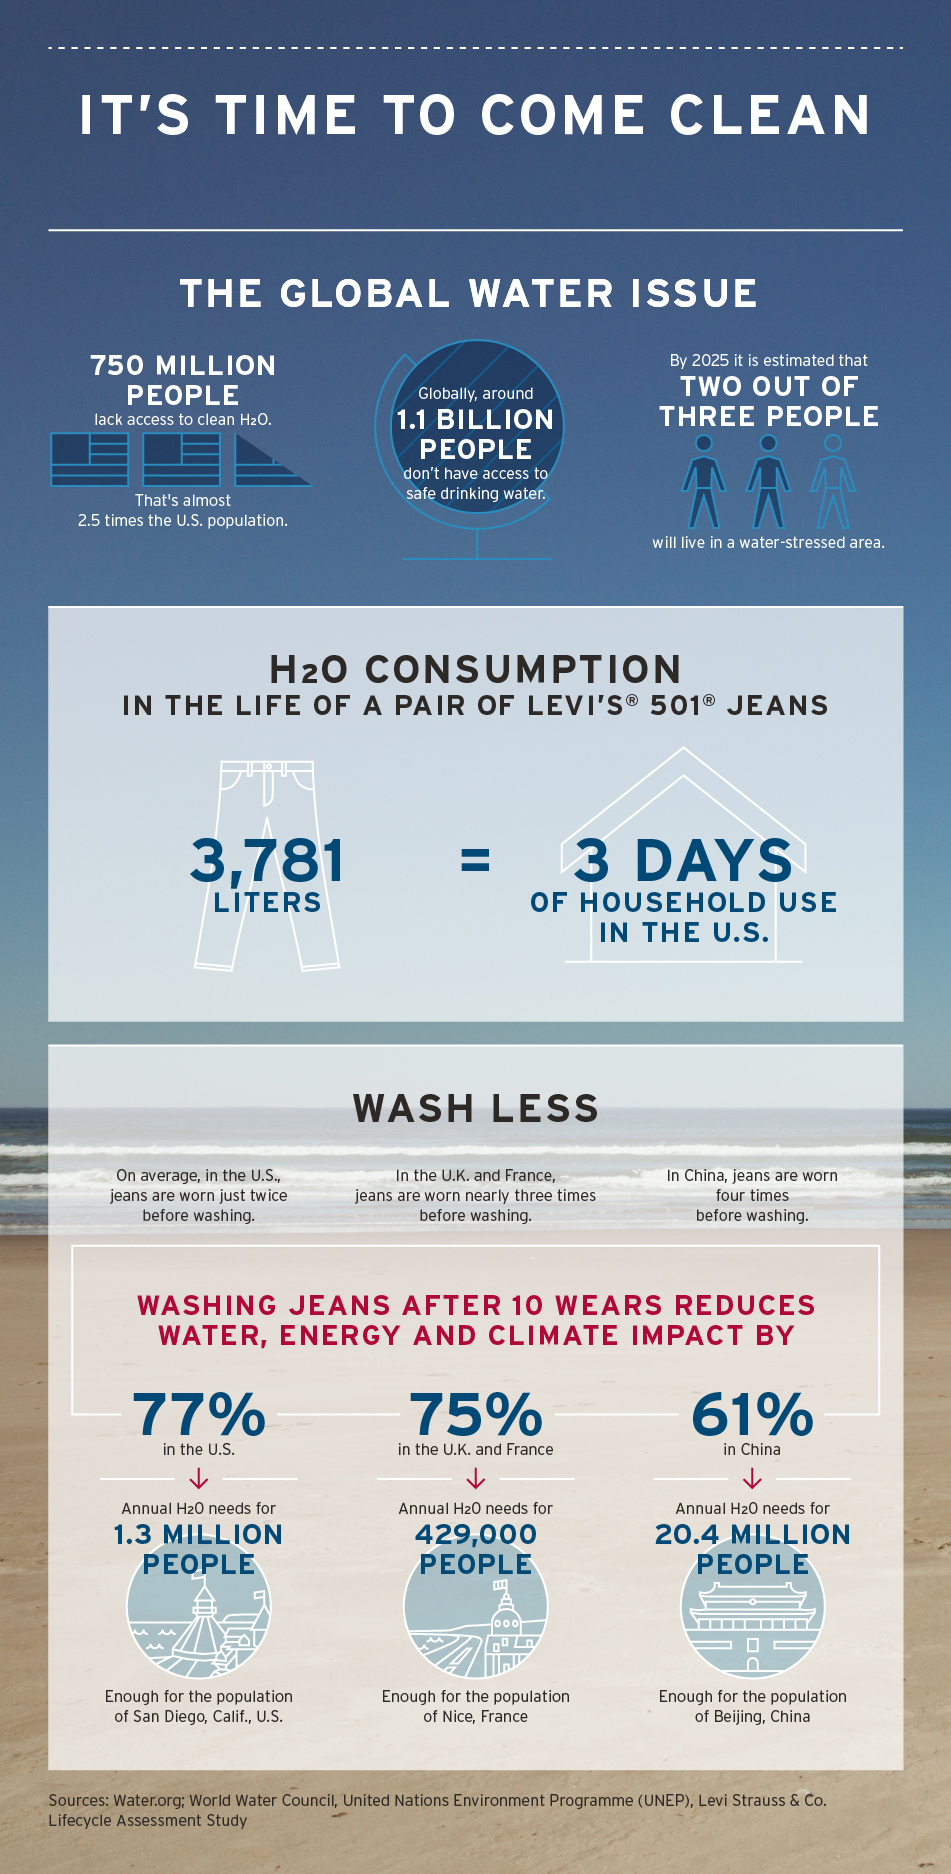 kat skrive Specialisere Levi Strauss & Co. Reaches 1 Billion Liters of Water Saved Through  Sustainability Initiatives; Releases New Environmental Impact Study on  Apparel | Business Wire